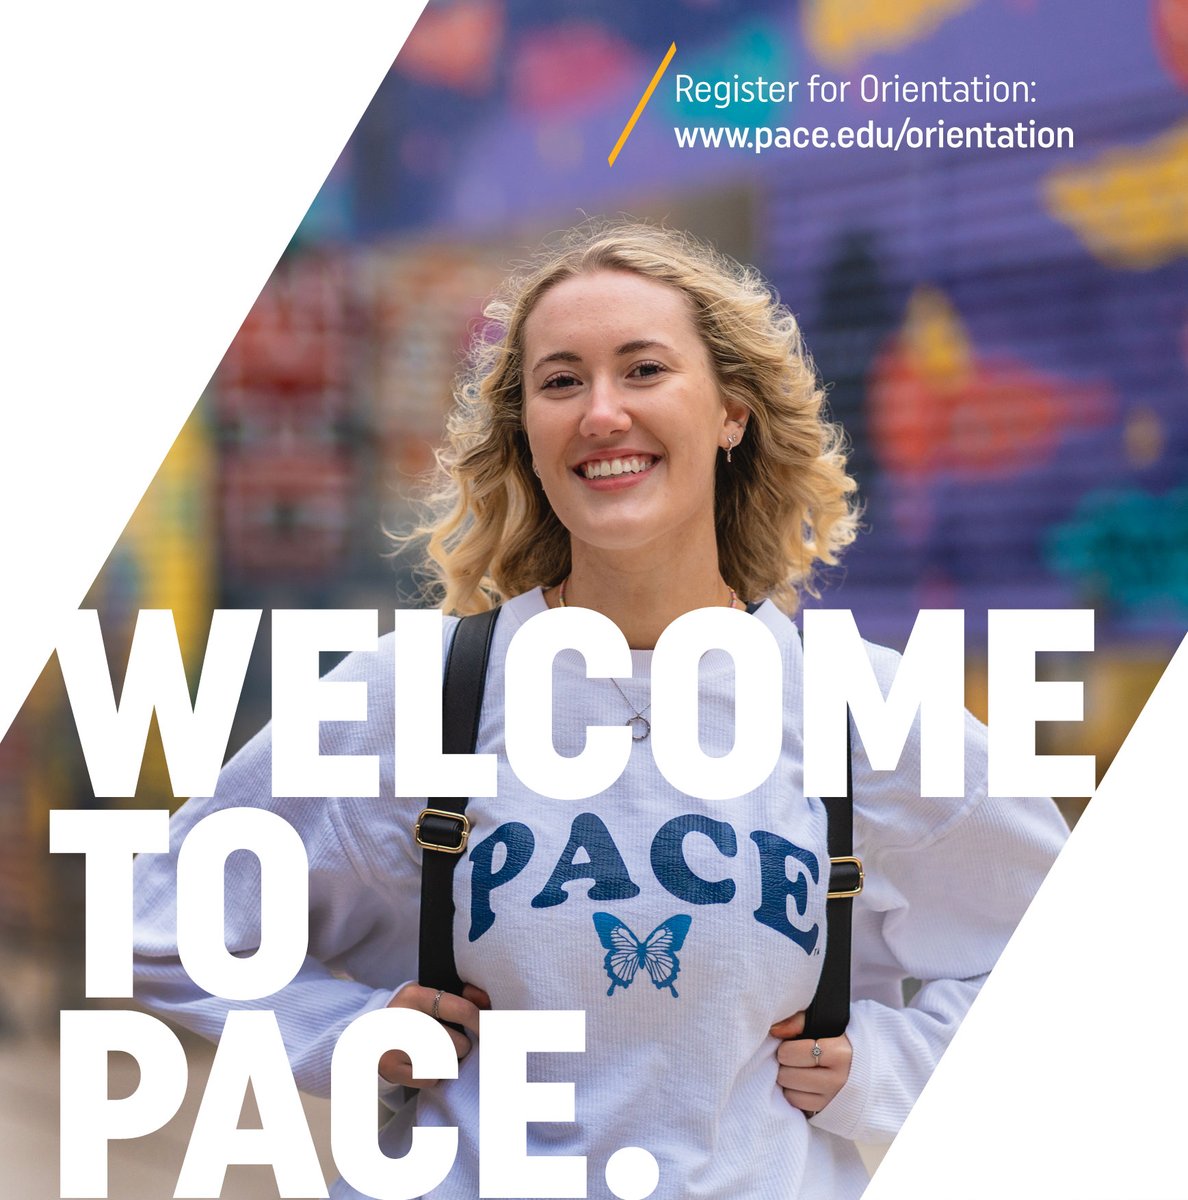 Hey, new Setters: Orientation is a crucial step in your undergrad journey, designed to help you transition into college life. Explore our Orientation programs and register for the one that best suits your needs: pace.edu/orientation